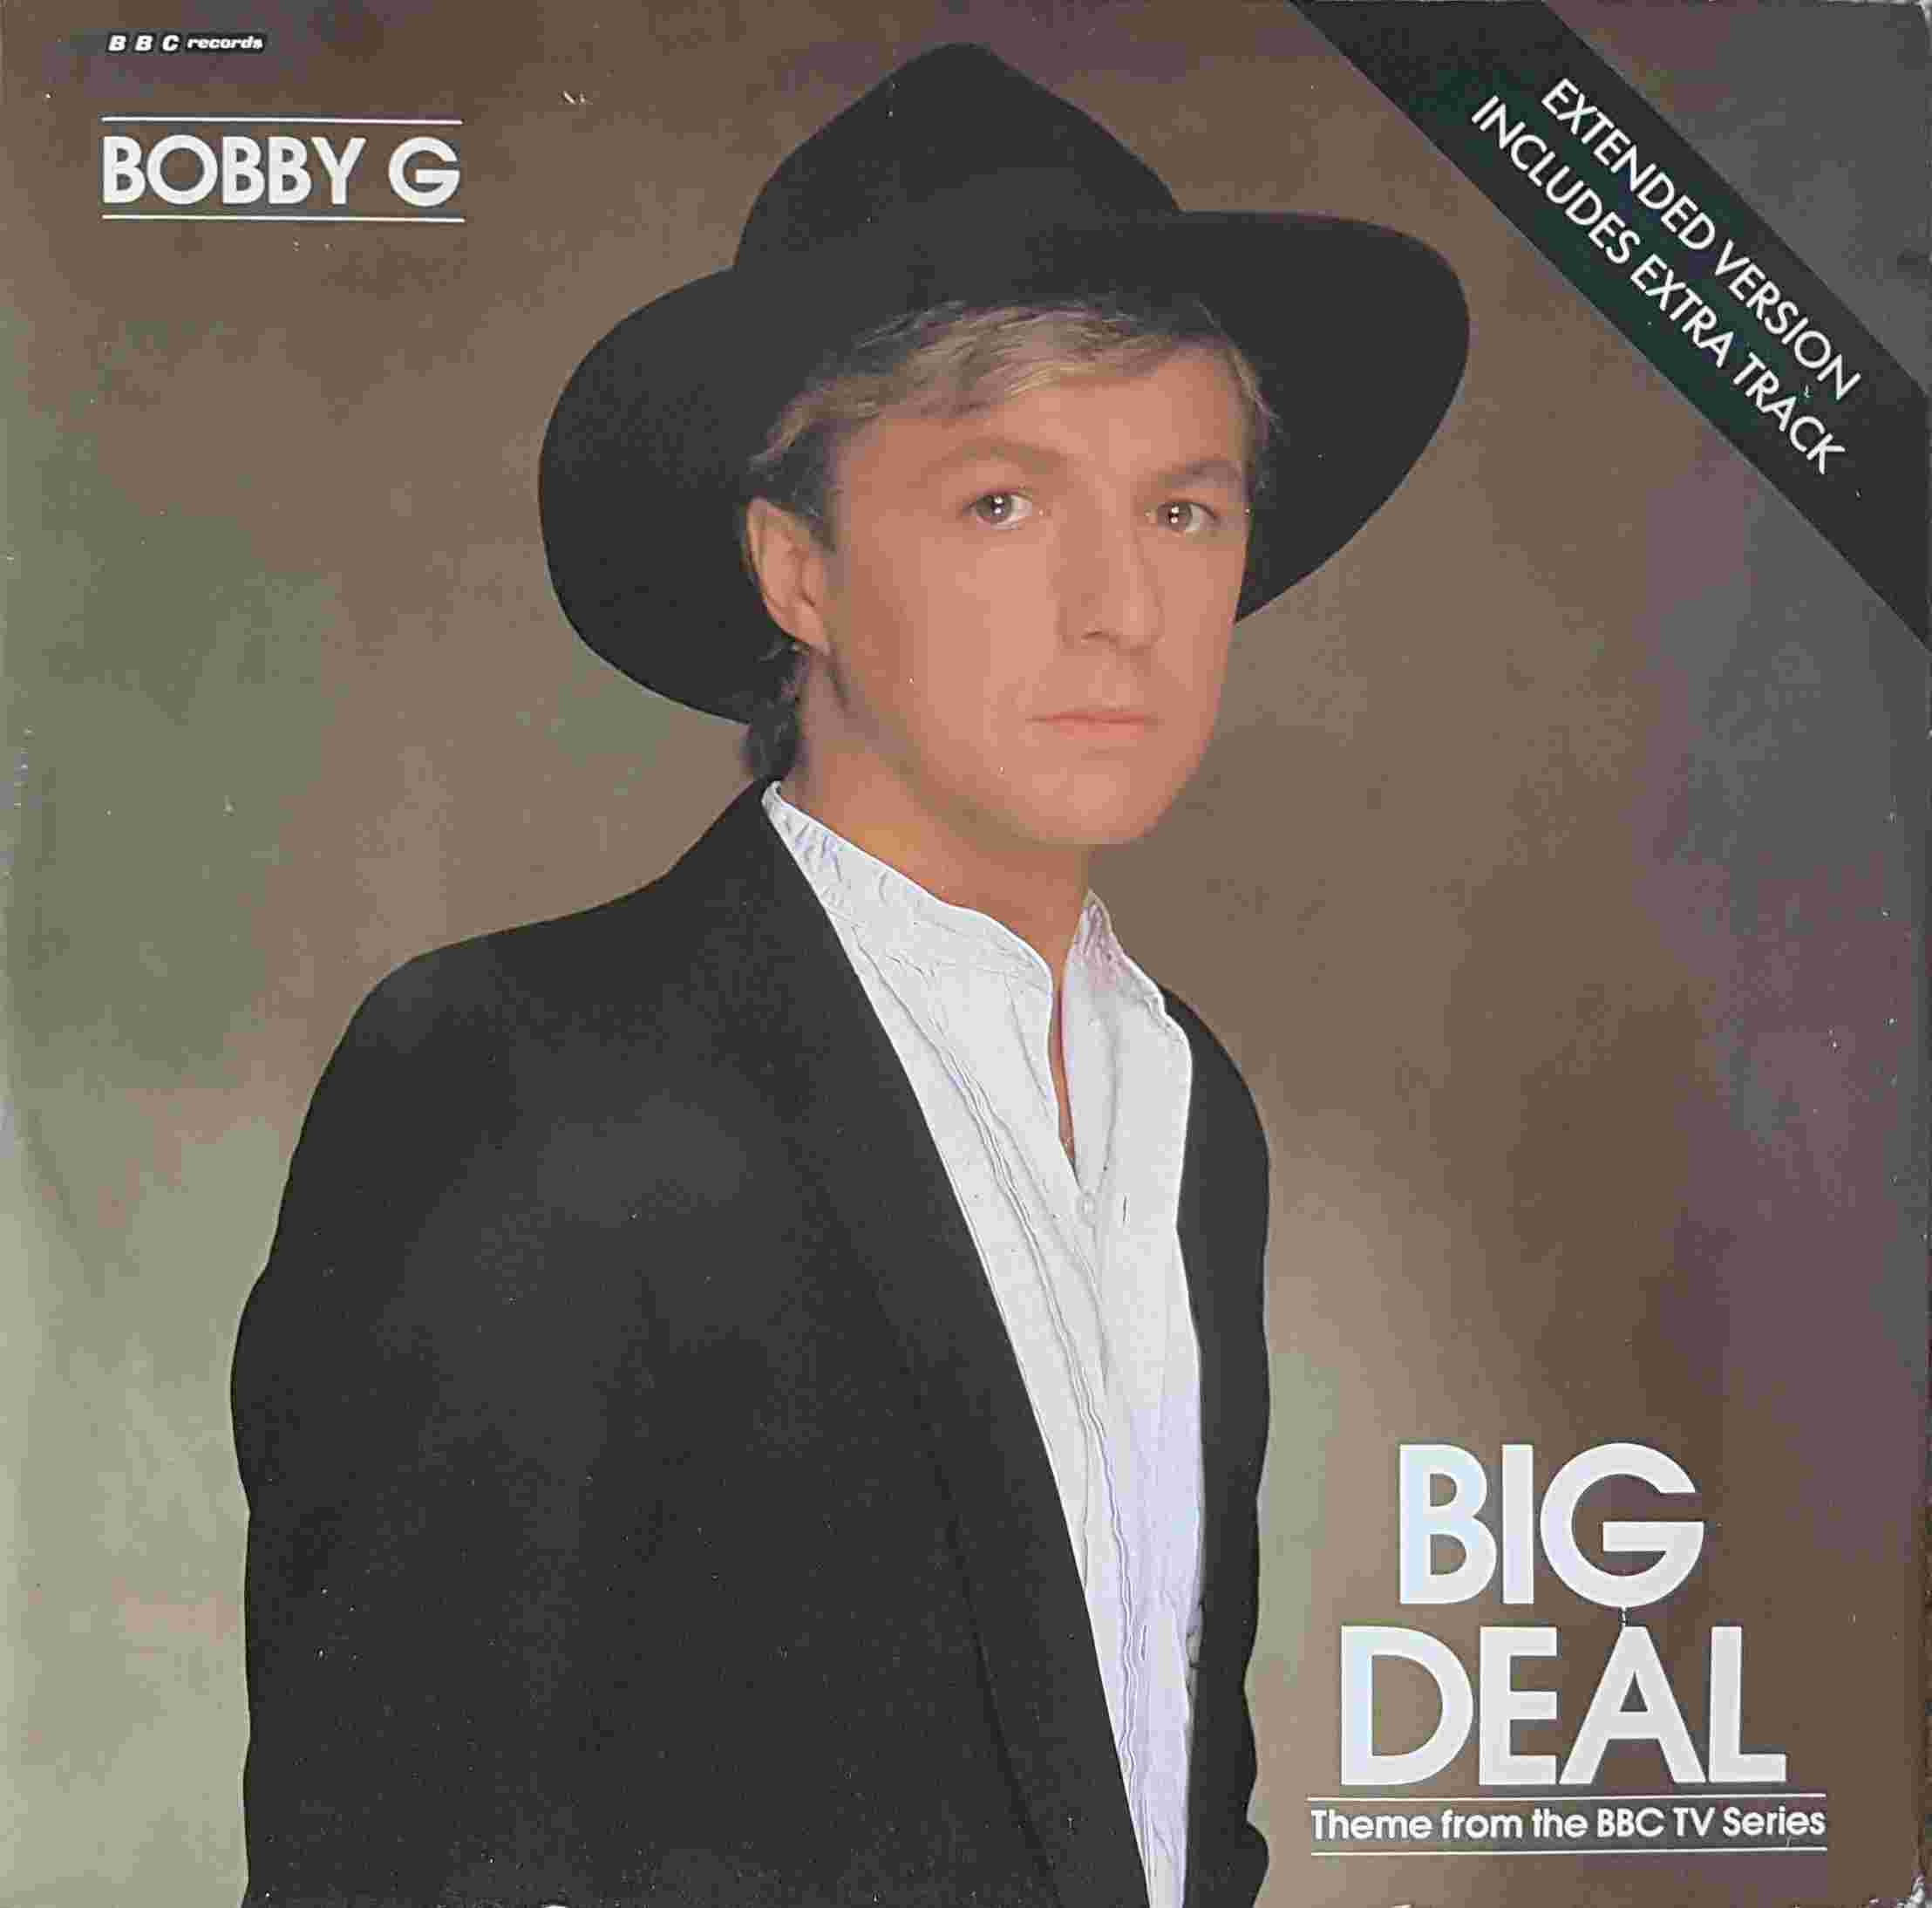 Picture of 12 RSL 151 Big deal by artist Bobby G from the BBC records and Tapes library